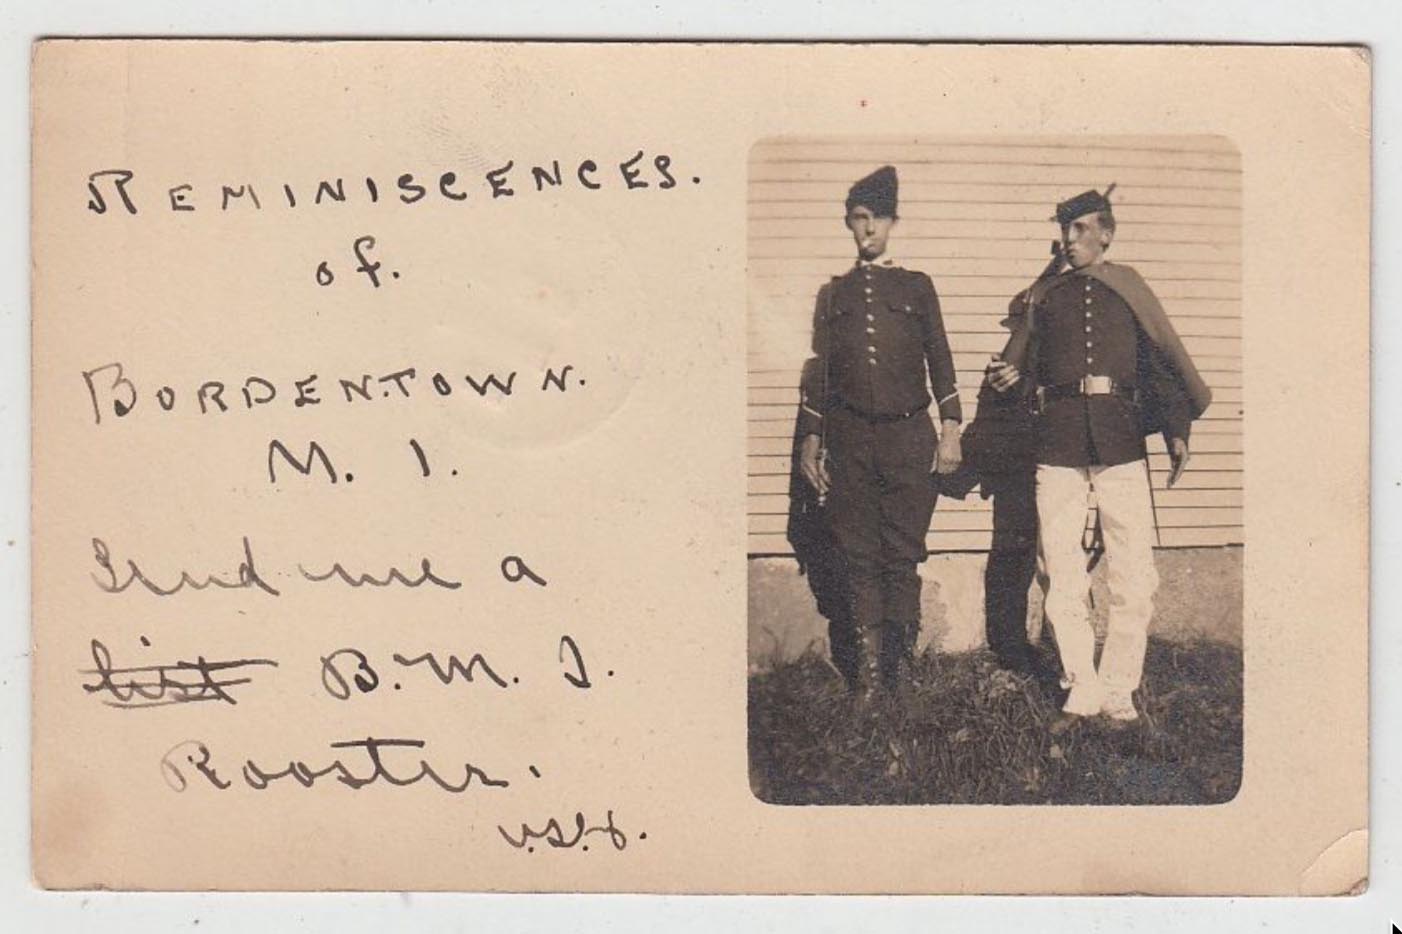 Bordentown - Students from Bordentown Military Institute - c 1910